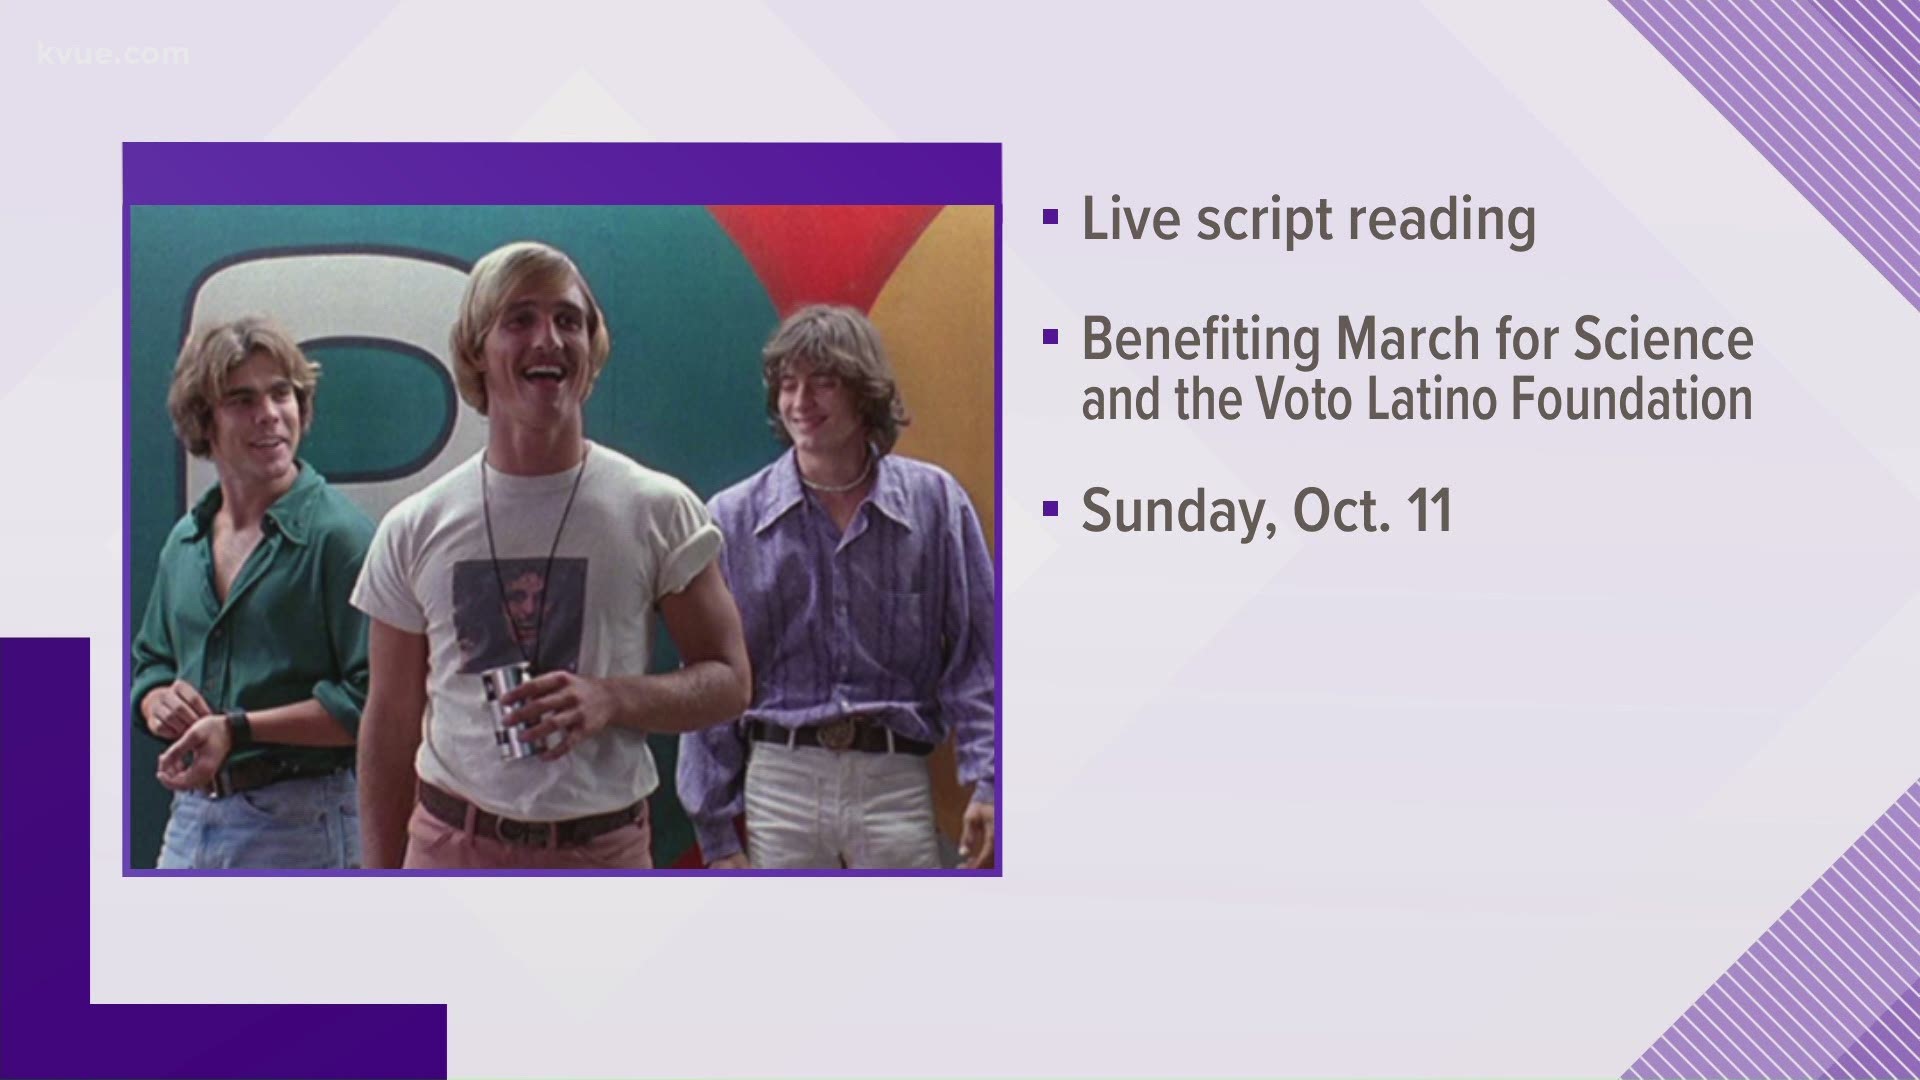 The cast of "Dazed and Confused" is reuniting for a live script reading to support voting in Texas. The cast is raising money for get-out-the-vote initiatives.